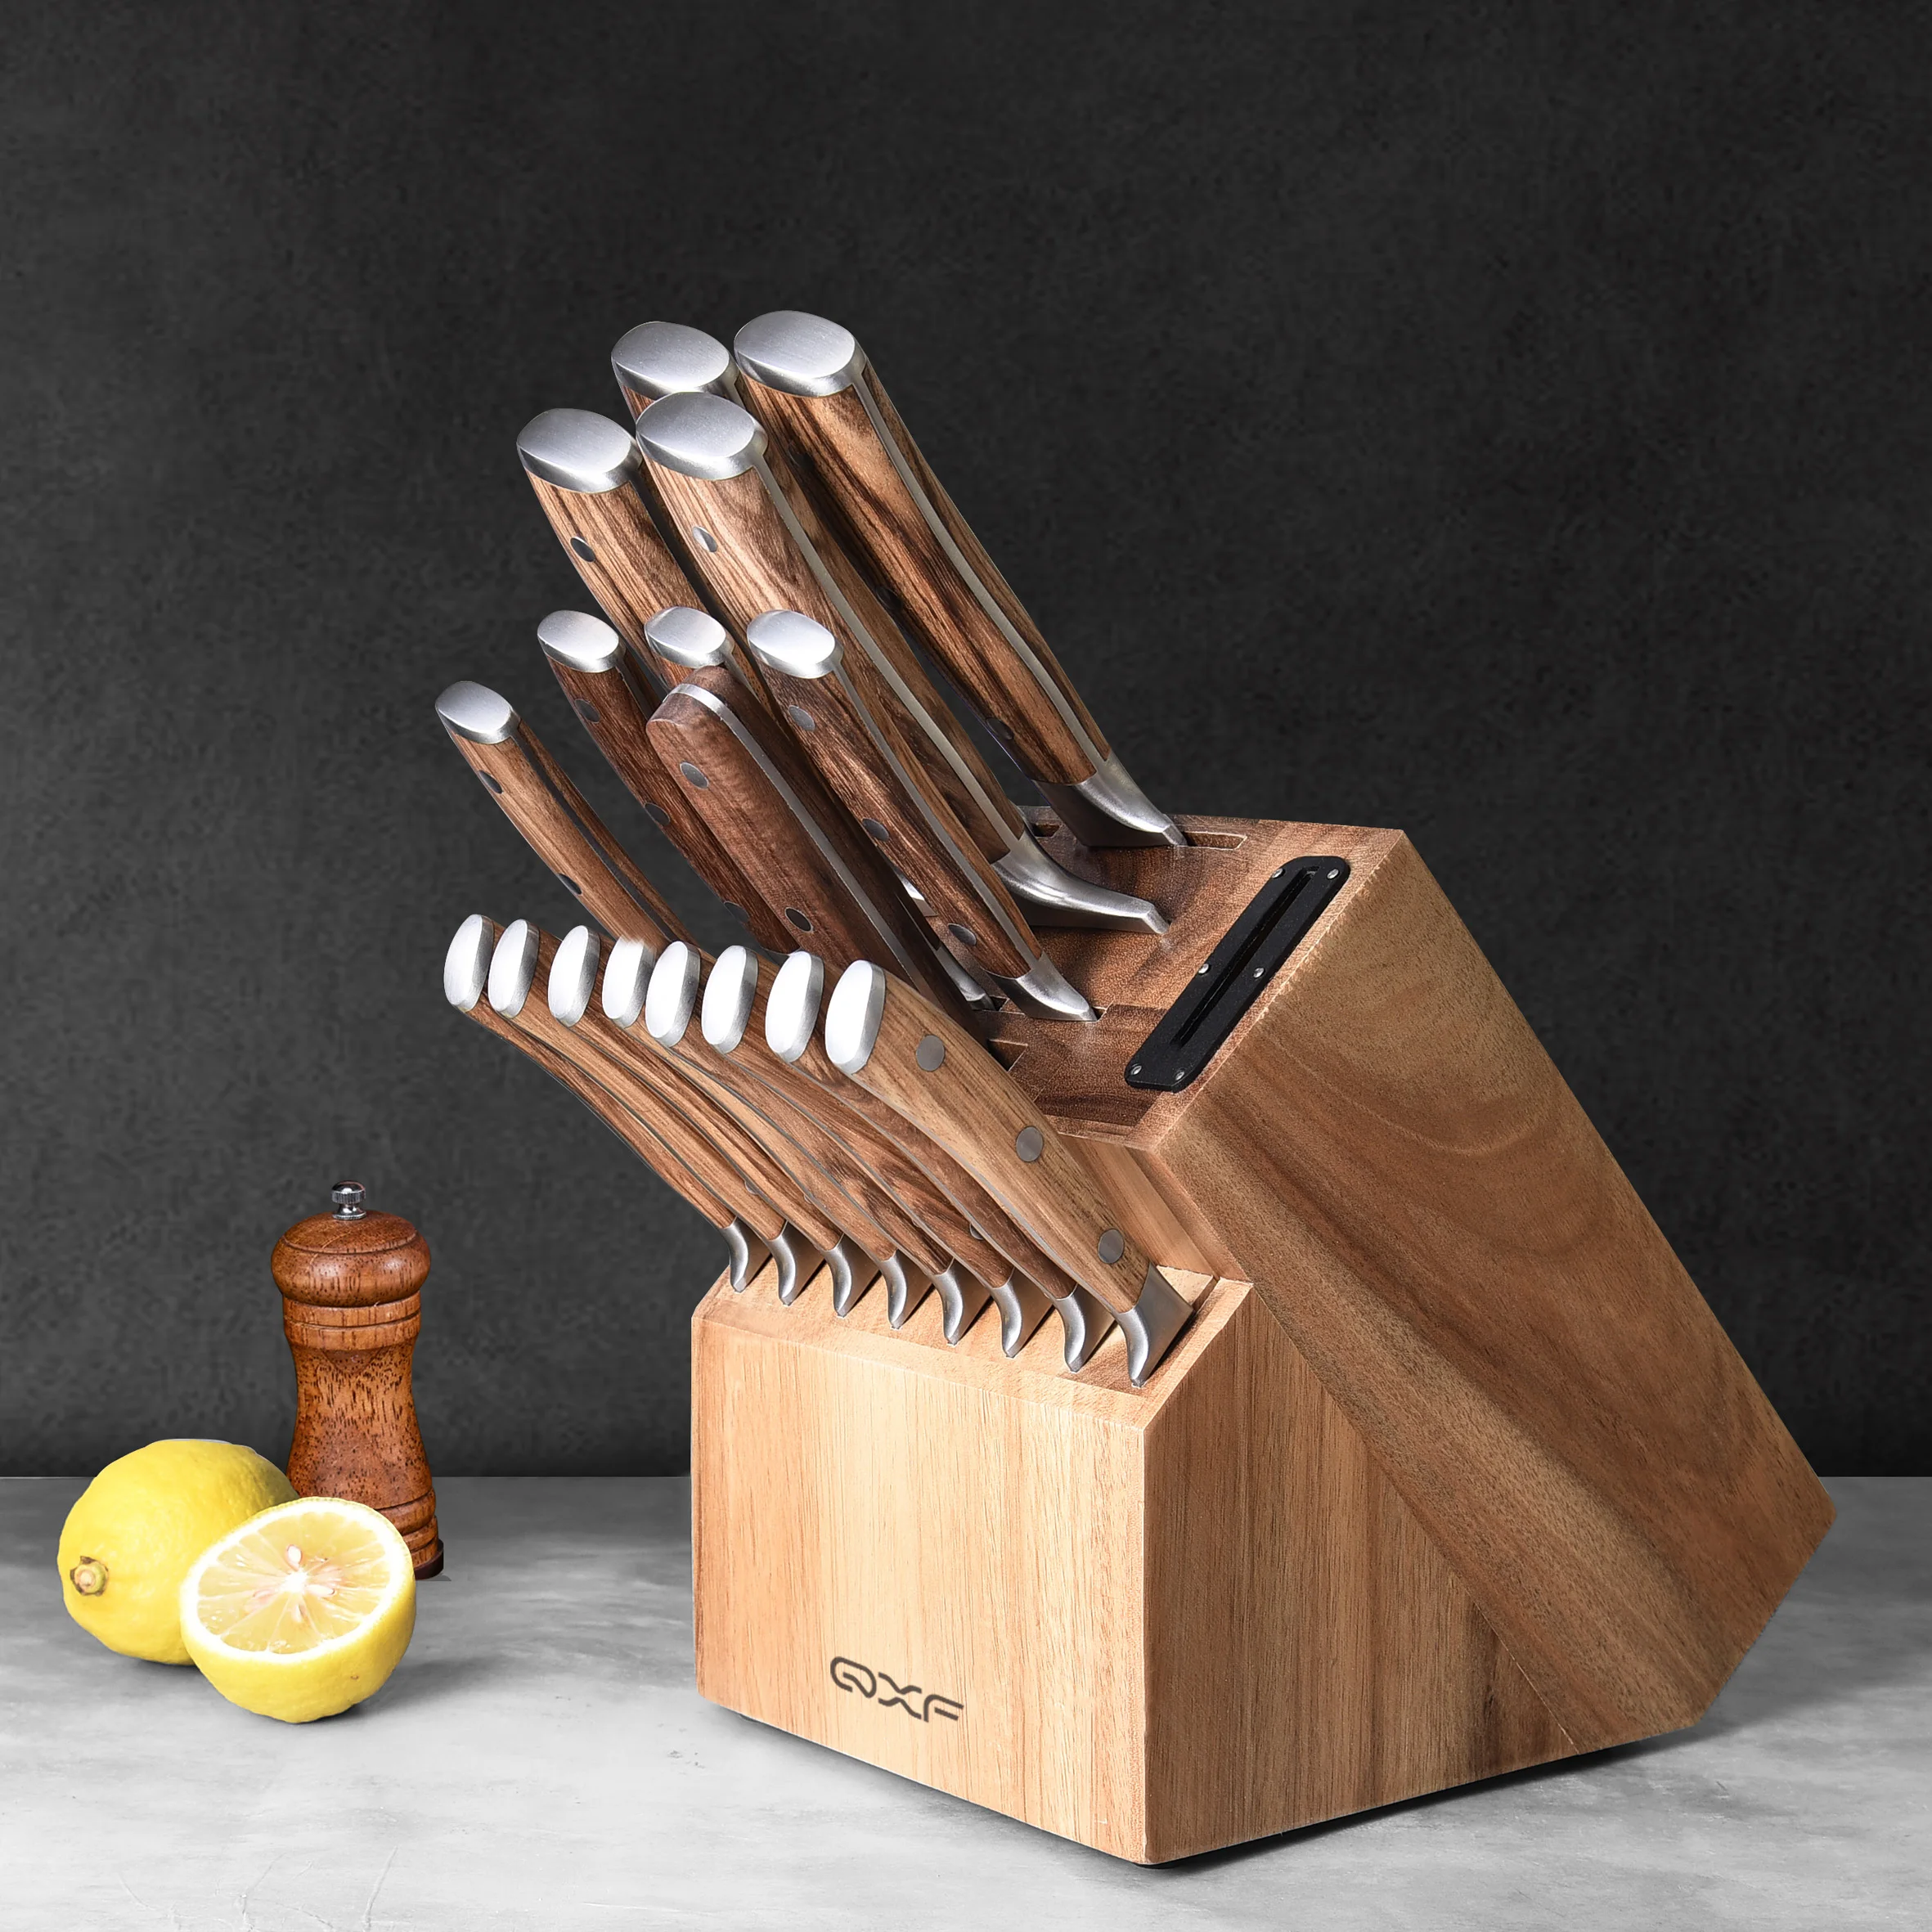 Hot Sale Premium Kitchen Wooden Knife Block Well-chosen Acacia Wood Knife Stand Knife Holder with Sharpener